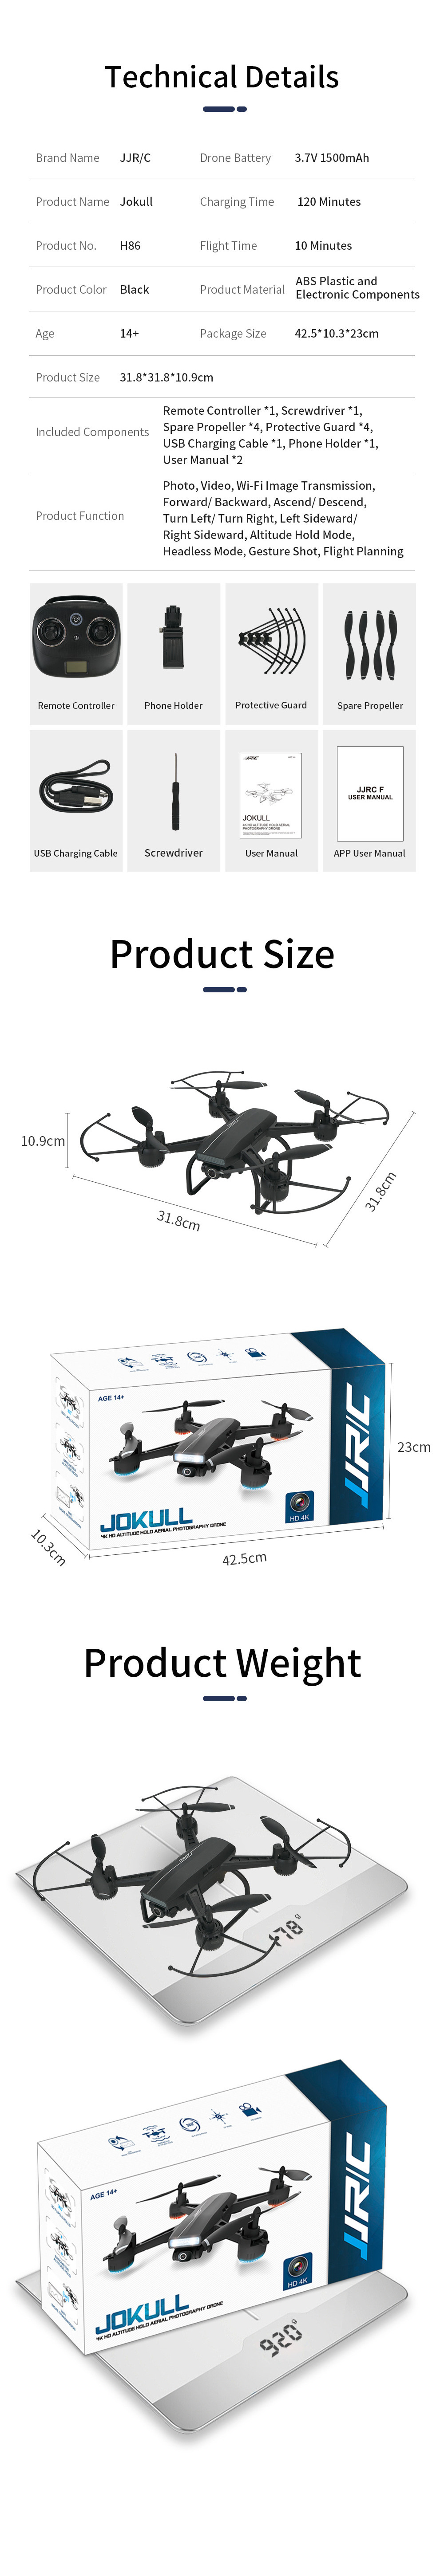 JJRC-H86-720P-WIFI-FPV-4K-Wide-Angle-Camera-With-Altitude-Hold-Mode-RC-Drone-Quadcopter-1628943-9